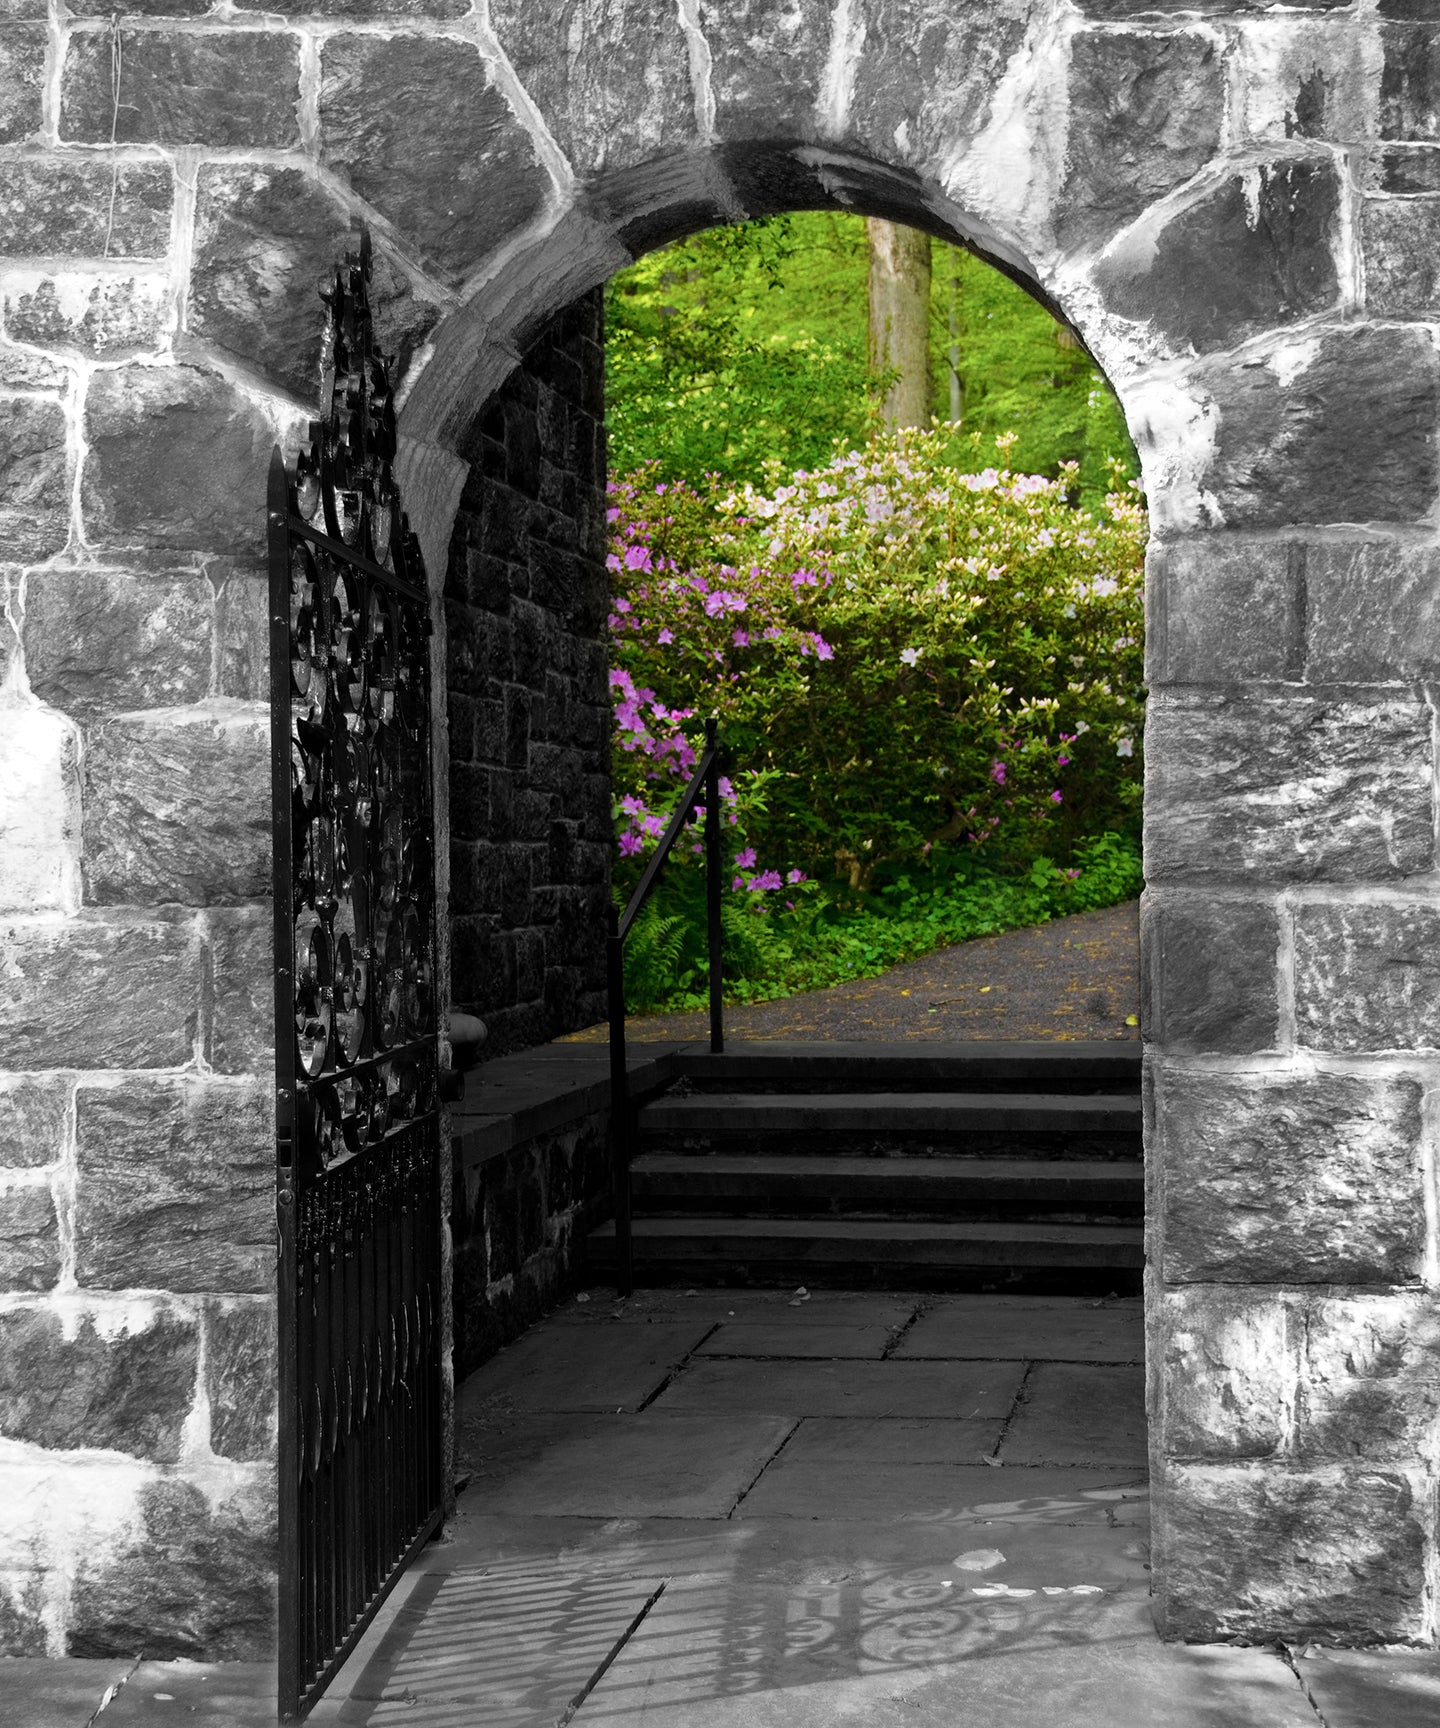 Garden Entryway Nature / Floral Photo Fine Art Canvas Wall Art Prints  - PIPAFINEART